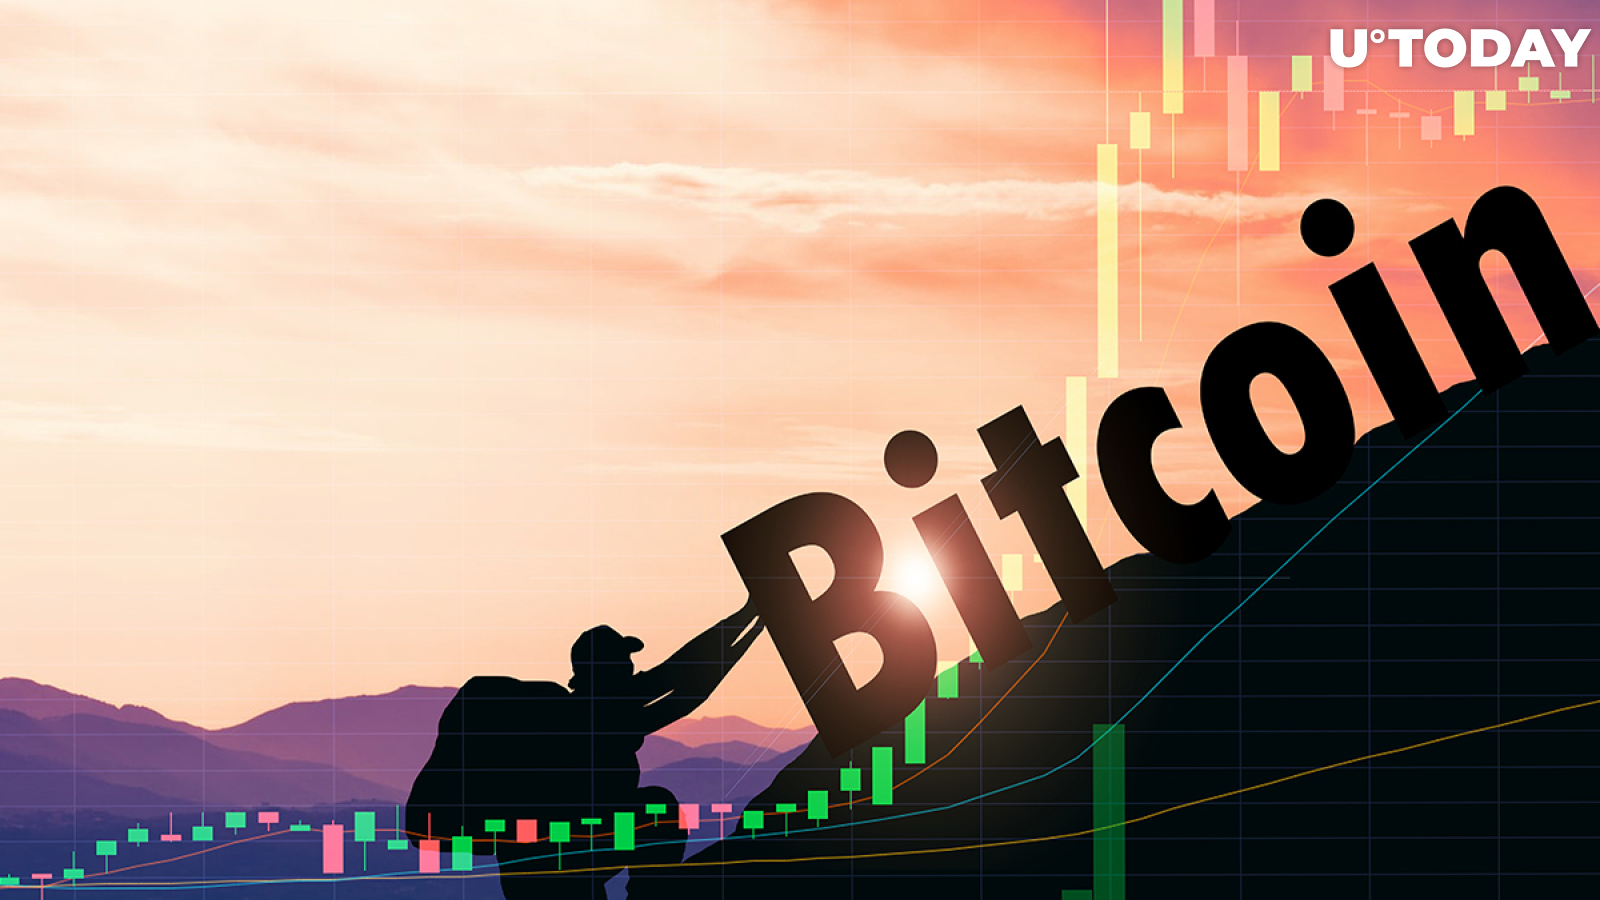 Institutional Investors and Whales Are the Ones Pushing Bitcoin Price Up: PwC Service Network